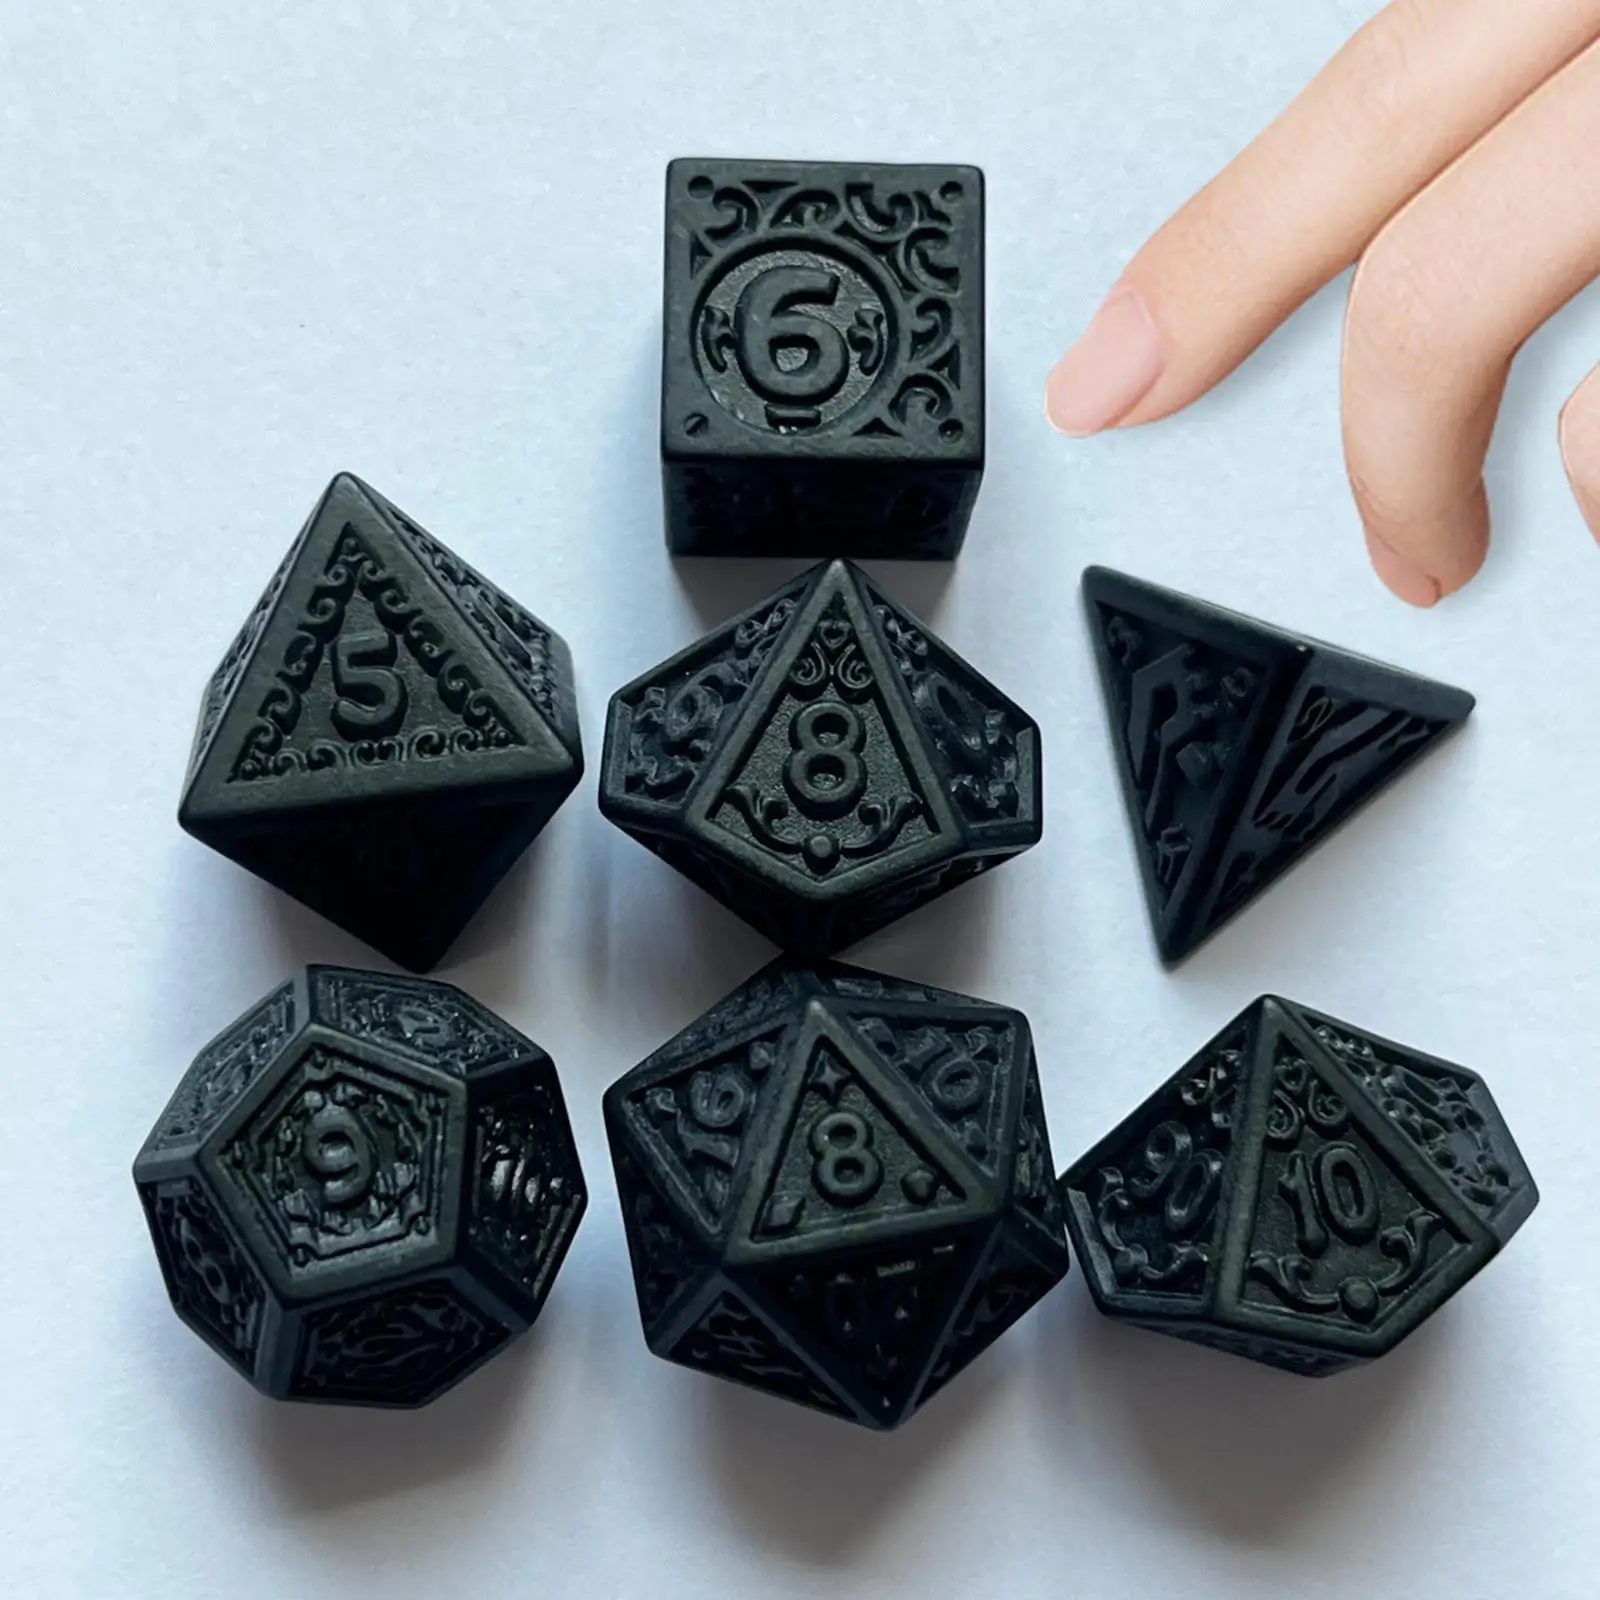 7 Pieces Polyhedral Dice Retro Style Handmade Party Favors Gift Black Board Game